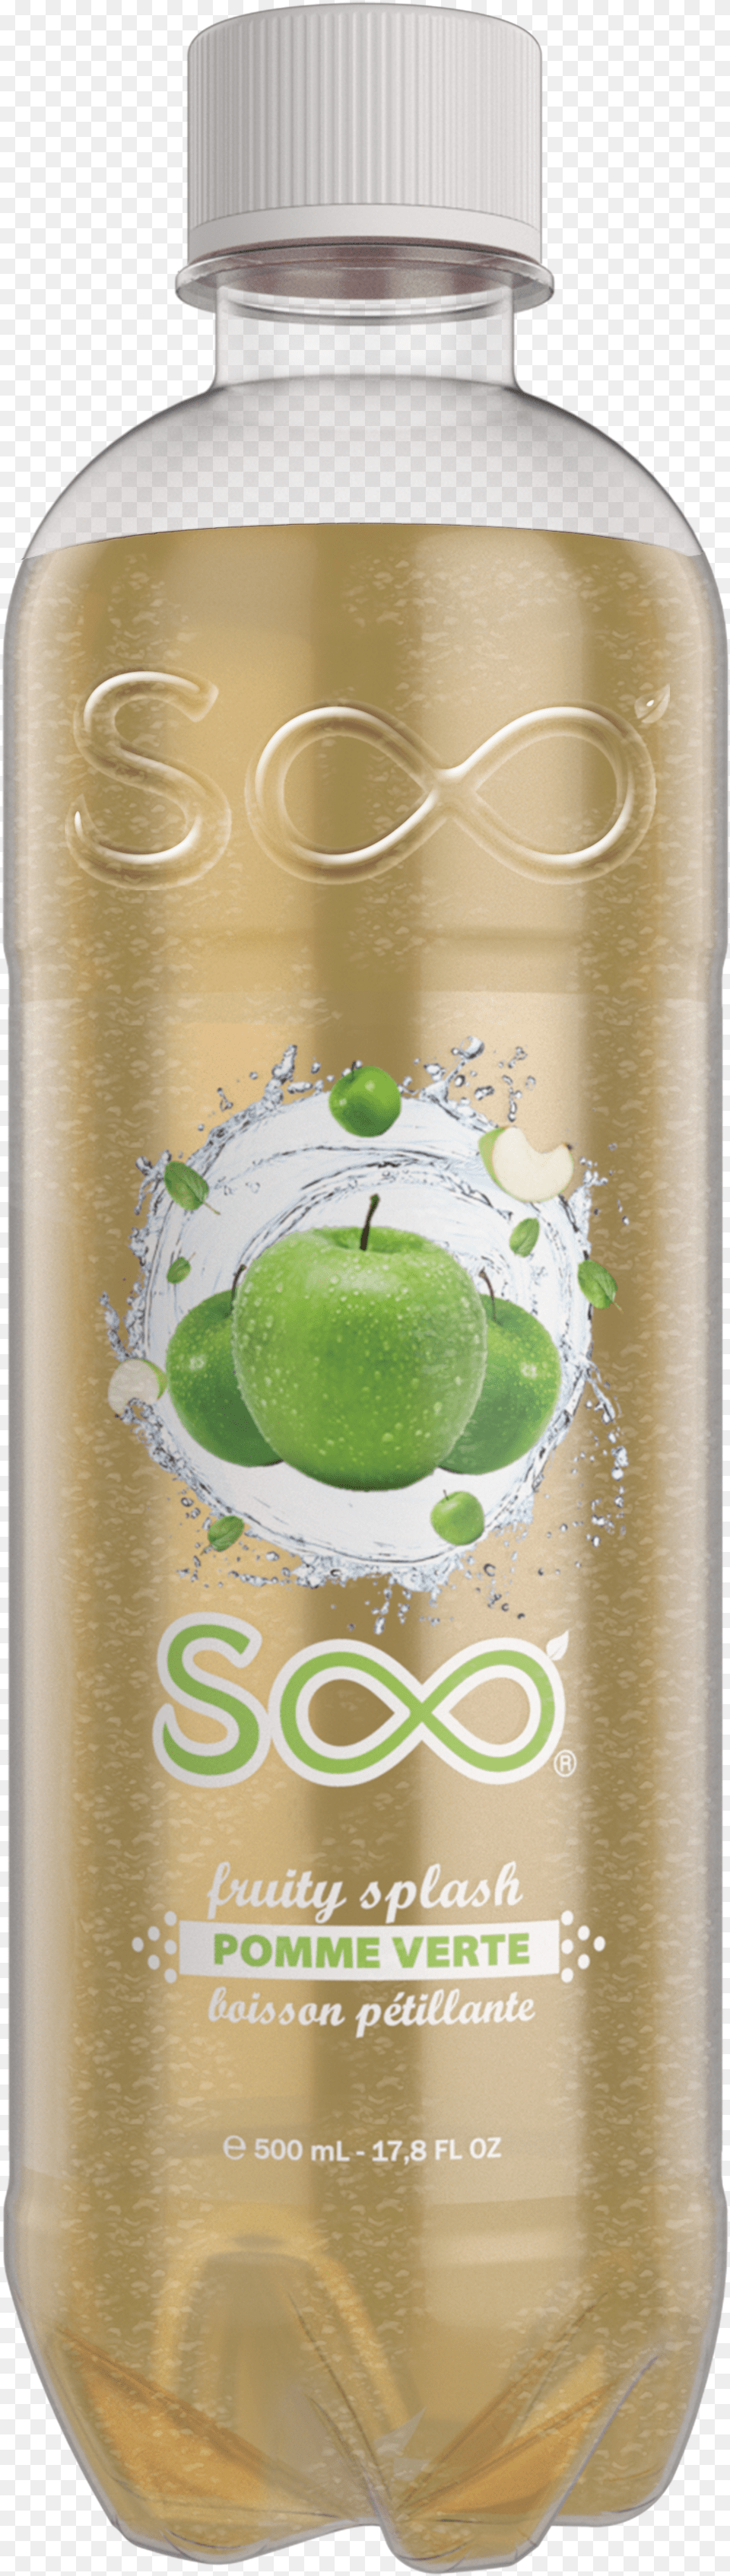 Soo Apple Flavour Carbonated Drink Free Transparent Png